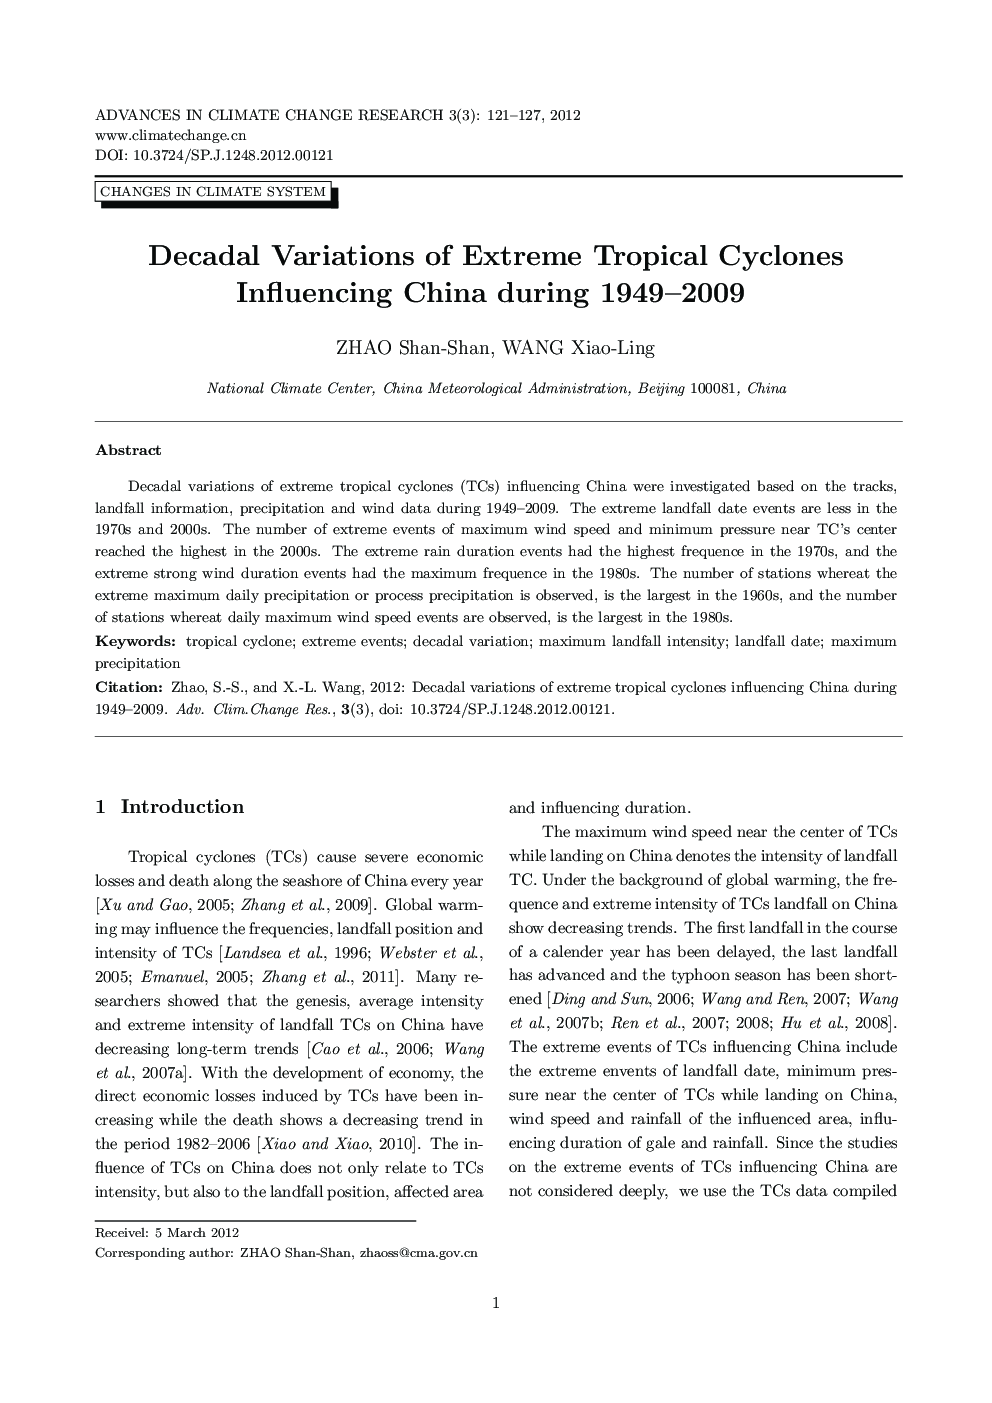 Decadal Variations of Extreme Tropical Cyclones Influencing China during 1949–2009